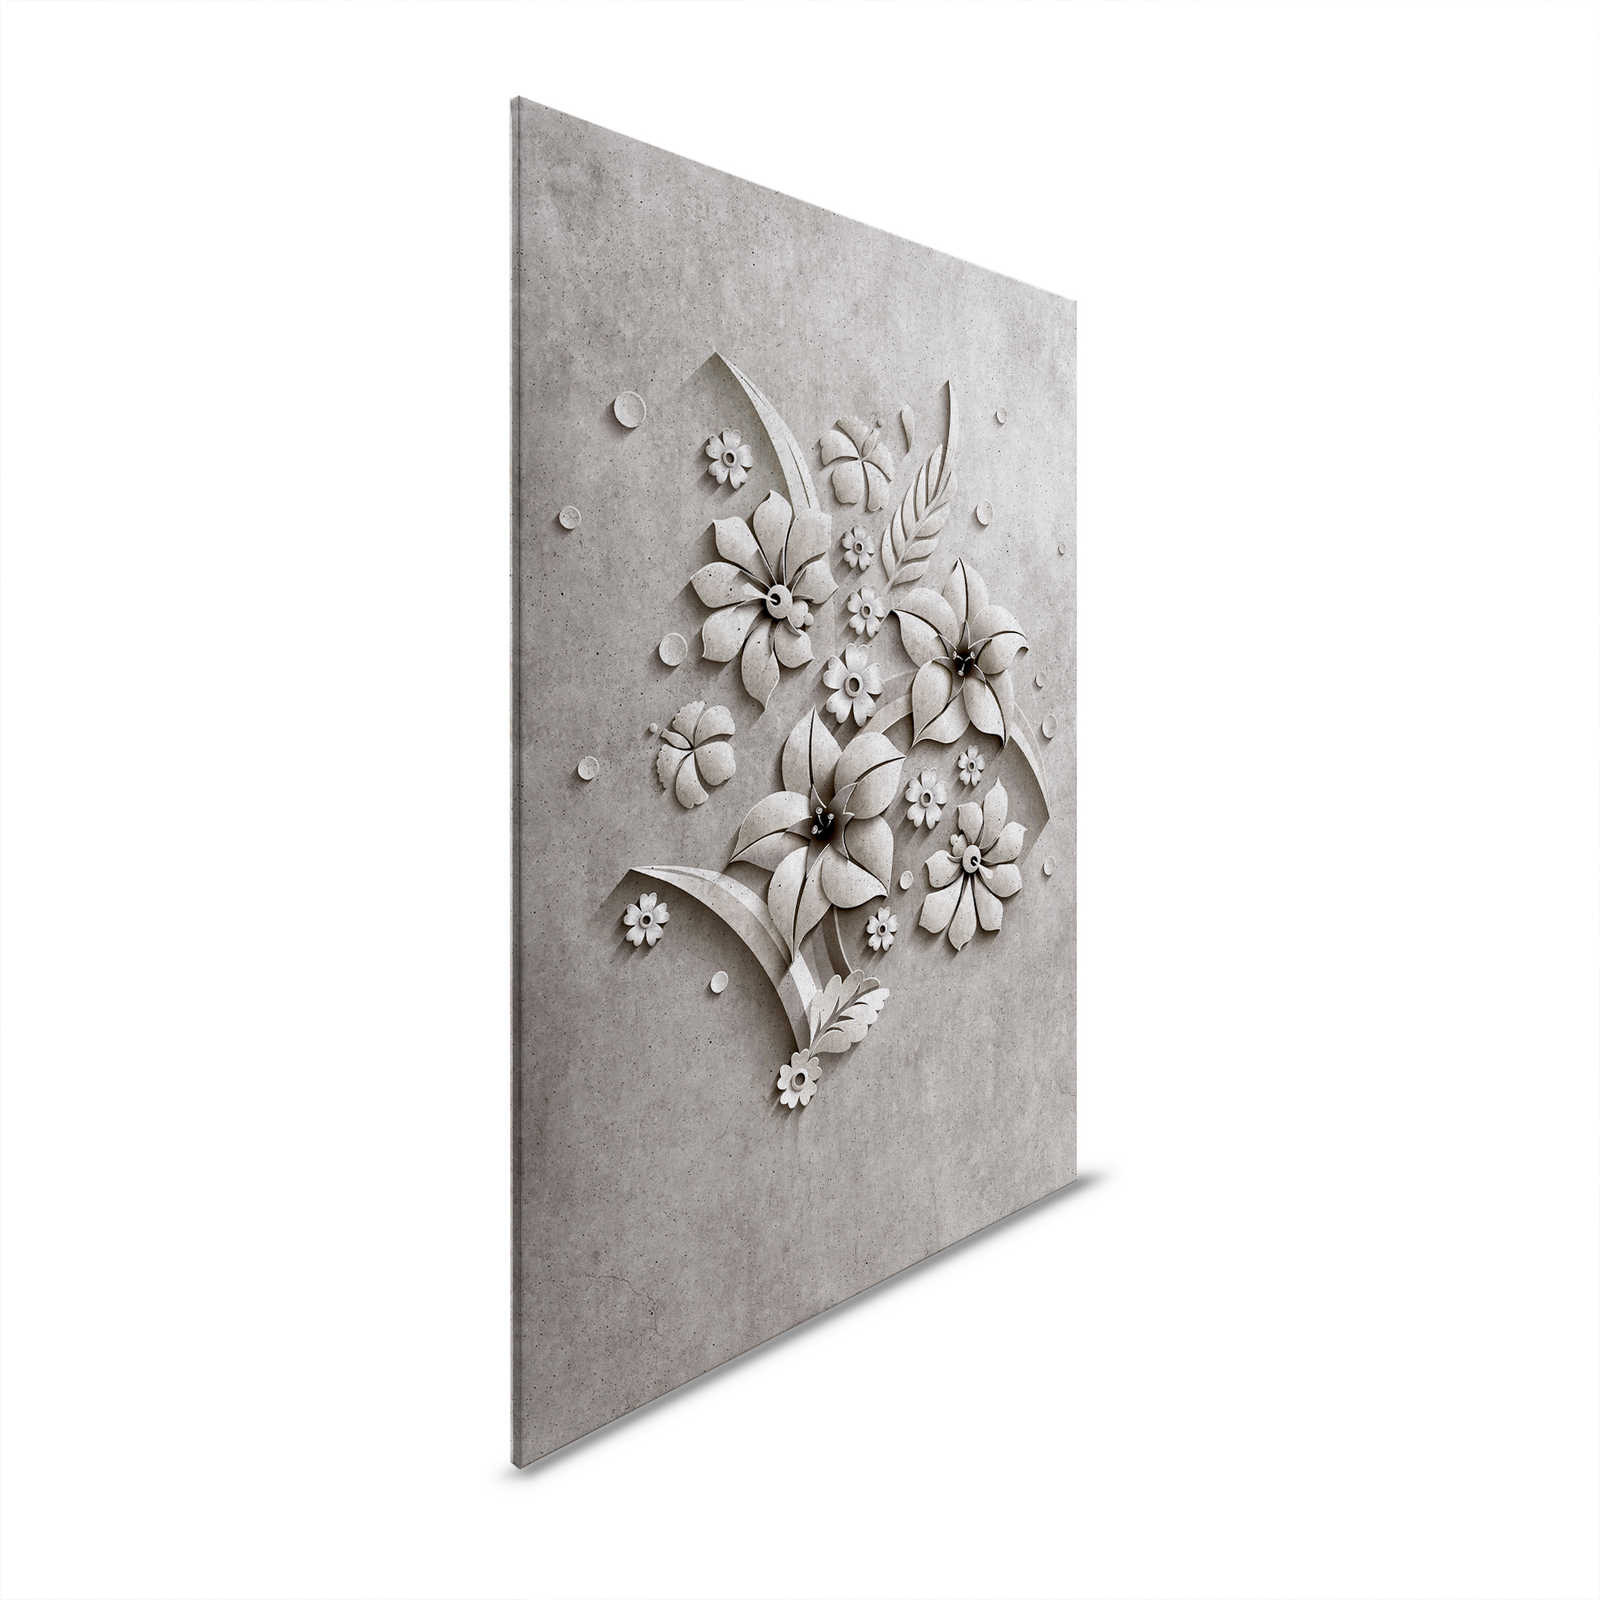 Relief 1 - Canvas painting in concrete structure of a flower relief - 1.20 m x 0.80 m
